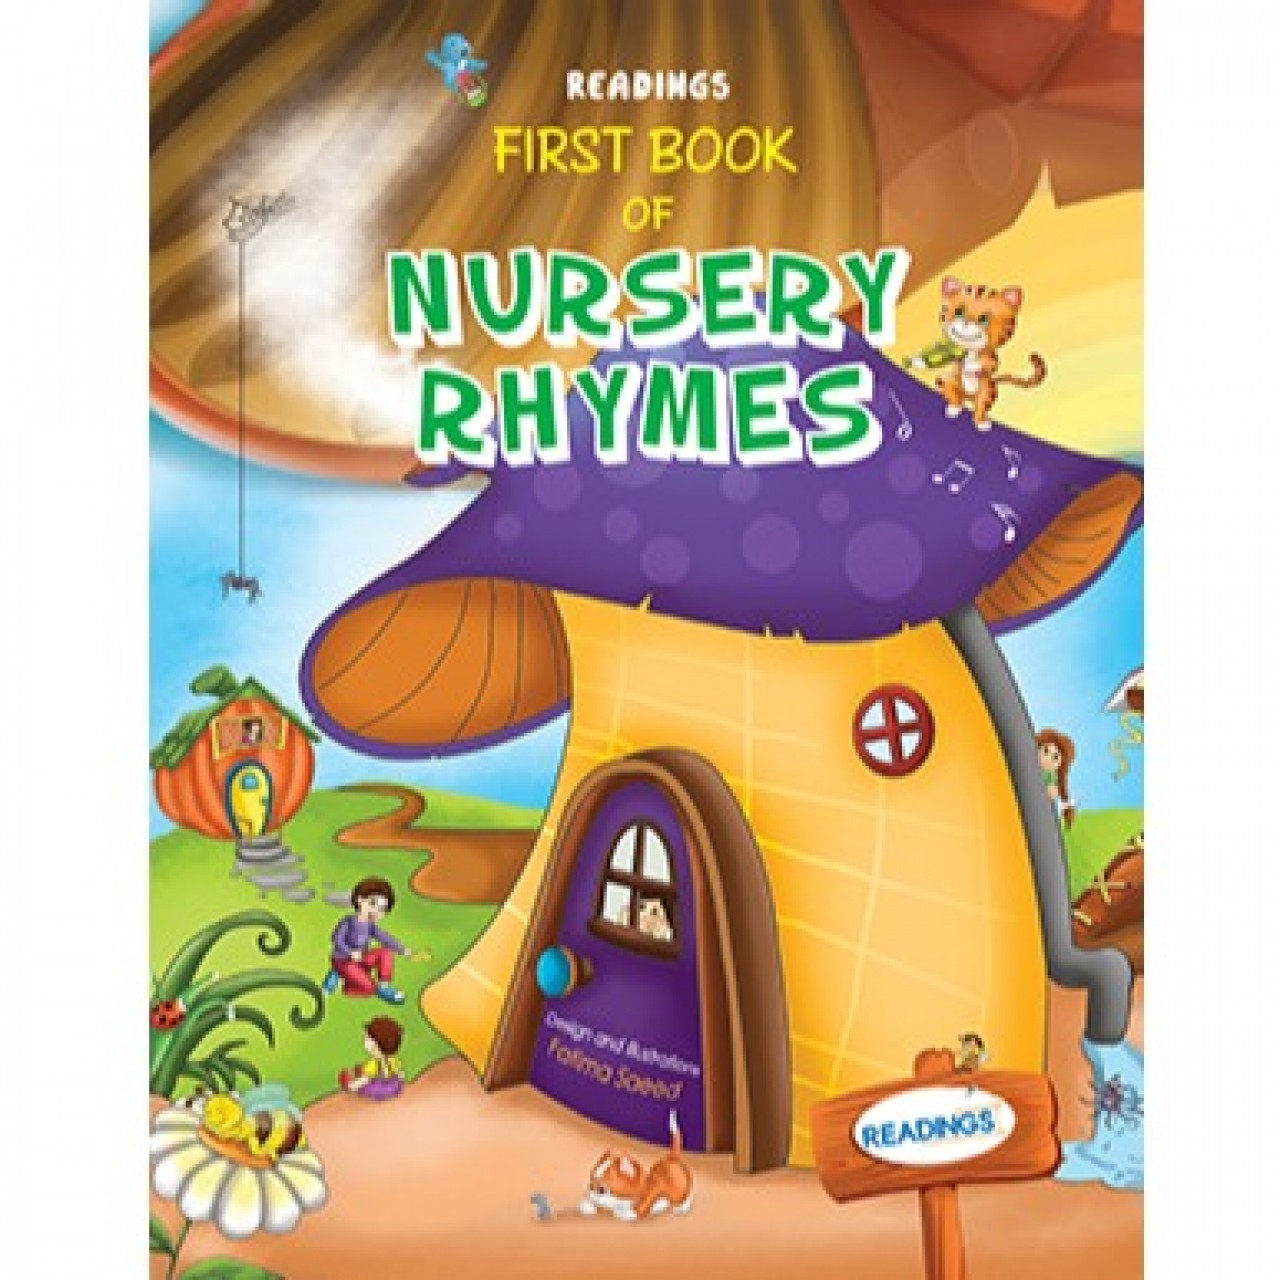 Readings First Book Of Nursery Rhymes For Kids - Paperback 2015